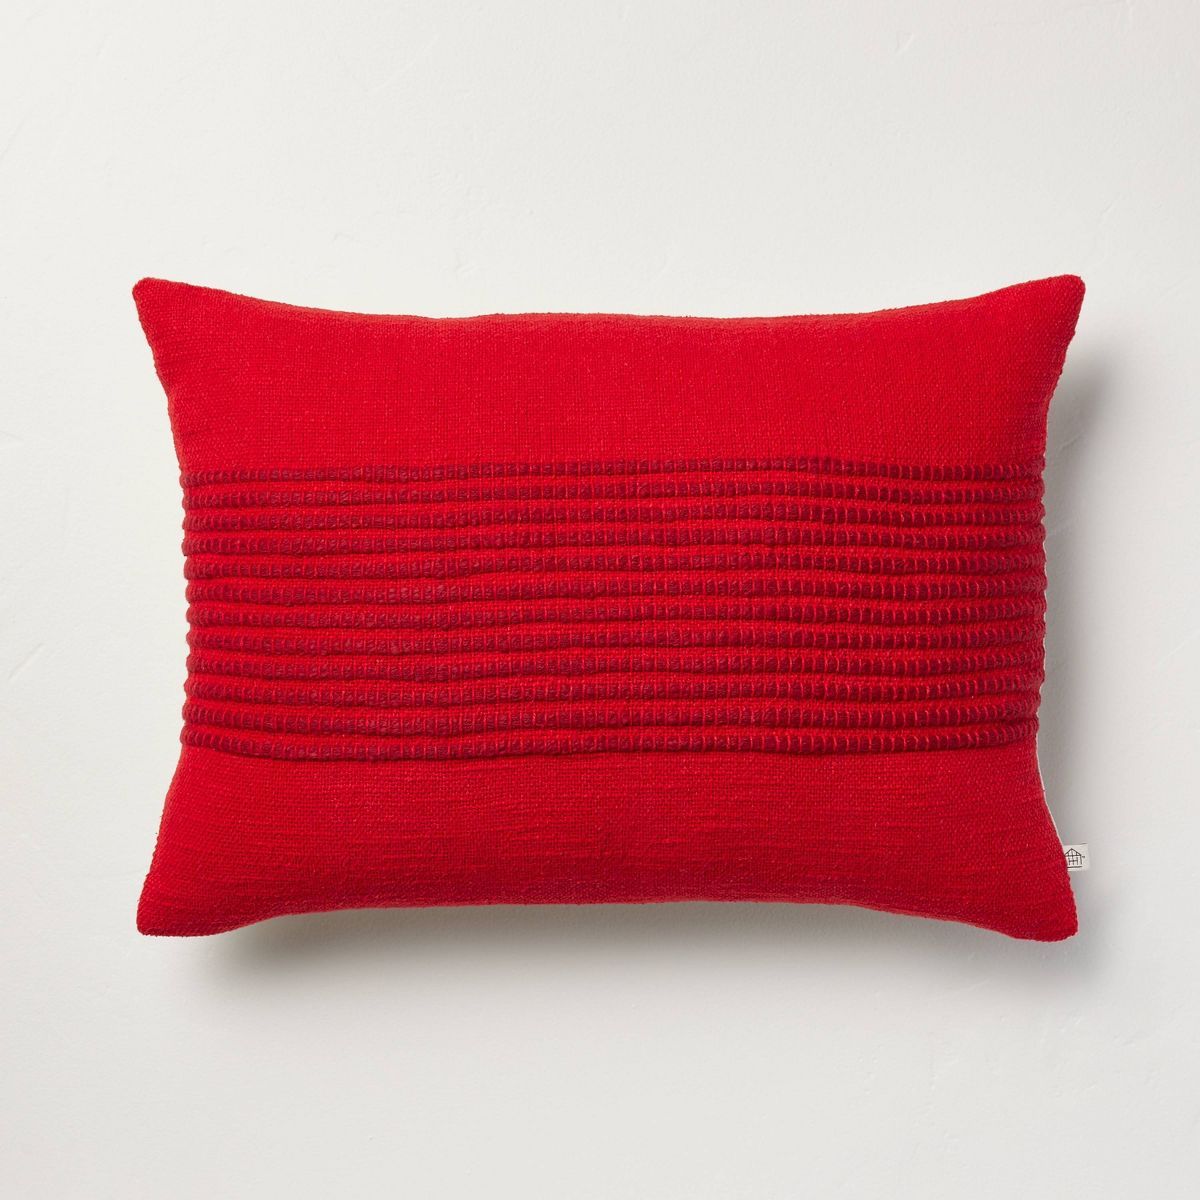 14"x20" Textured Center Stripes Lumbar Throw Pillow Red - Hearth & Hand™ with Magnolia | Target